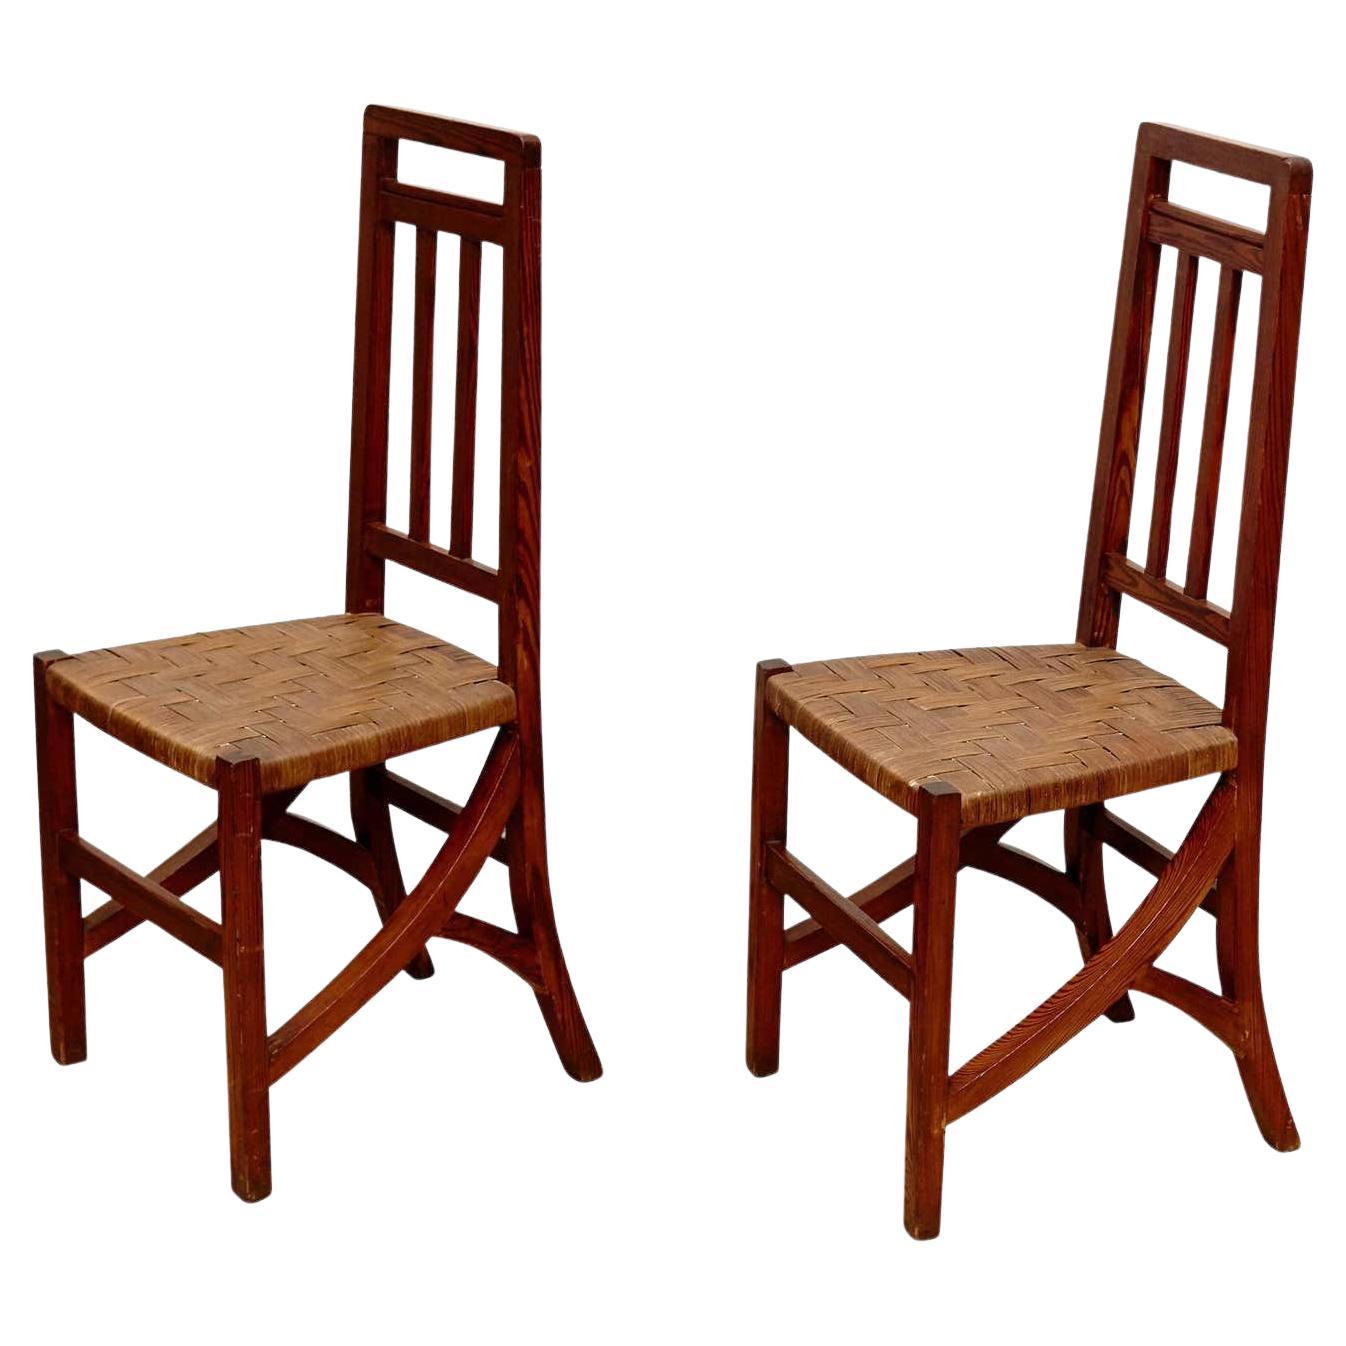 Set of Two Arts & Crafts Chairs in Wood and Rattan, circa 1910 For Sale